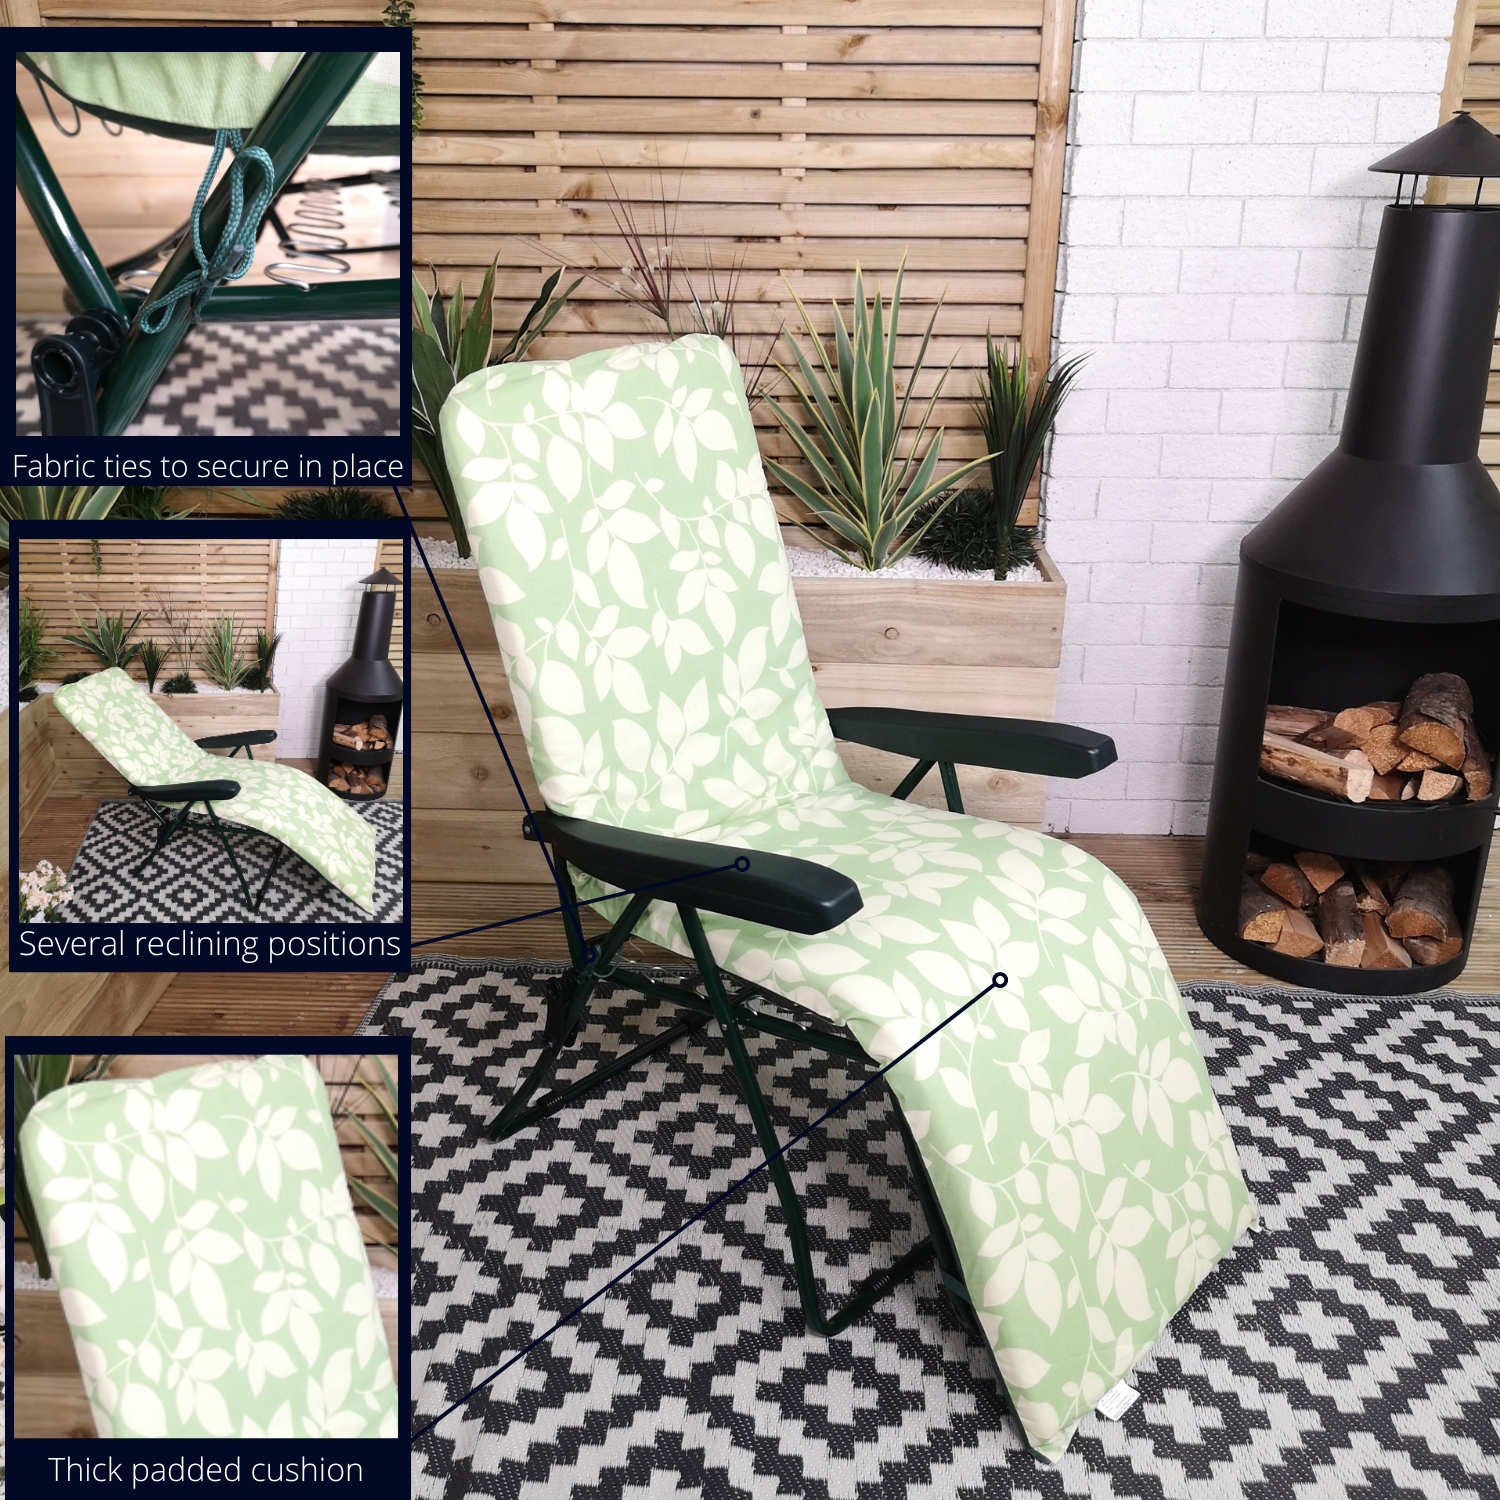 Set of 2 Padded Outdoor Garden Patio Recliner / Sun Lounger Green with Leaf Pattern